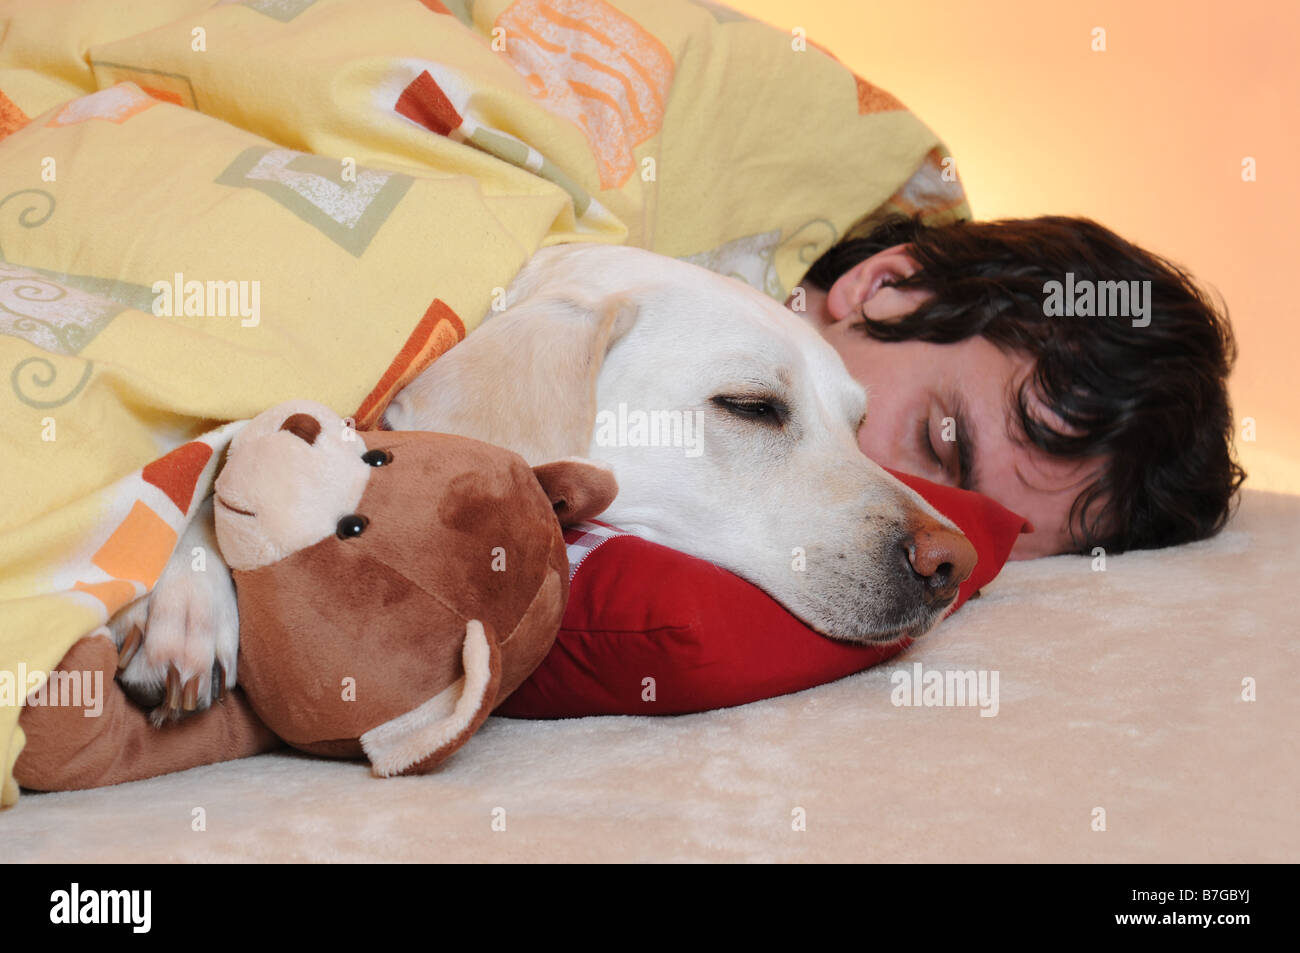 White labrador retriever sleeping in bed with teddy bear and a young man. Stock Photo